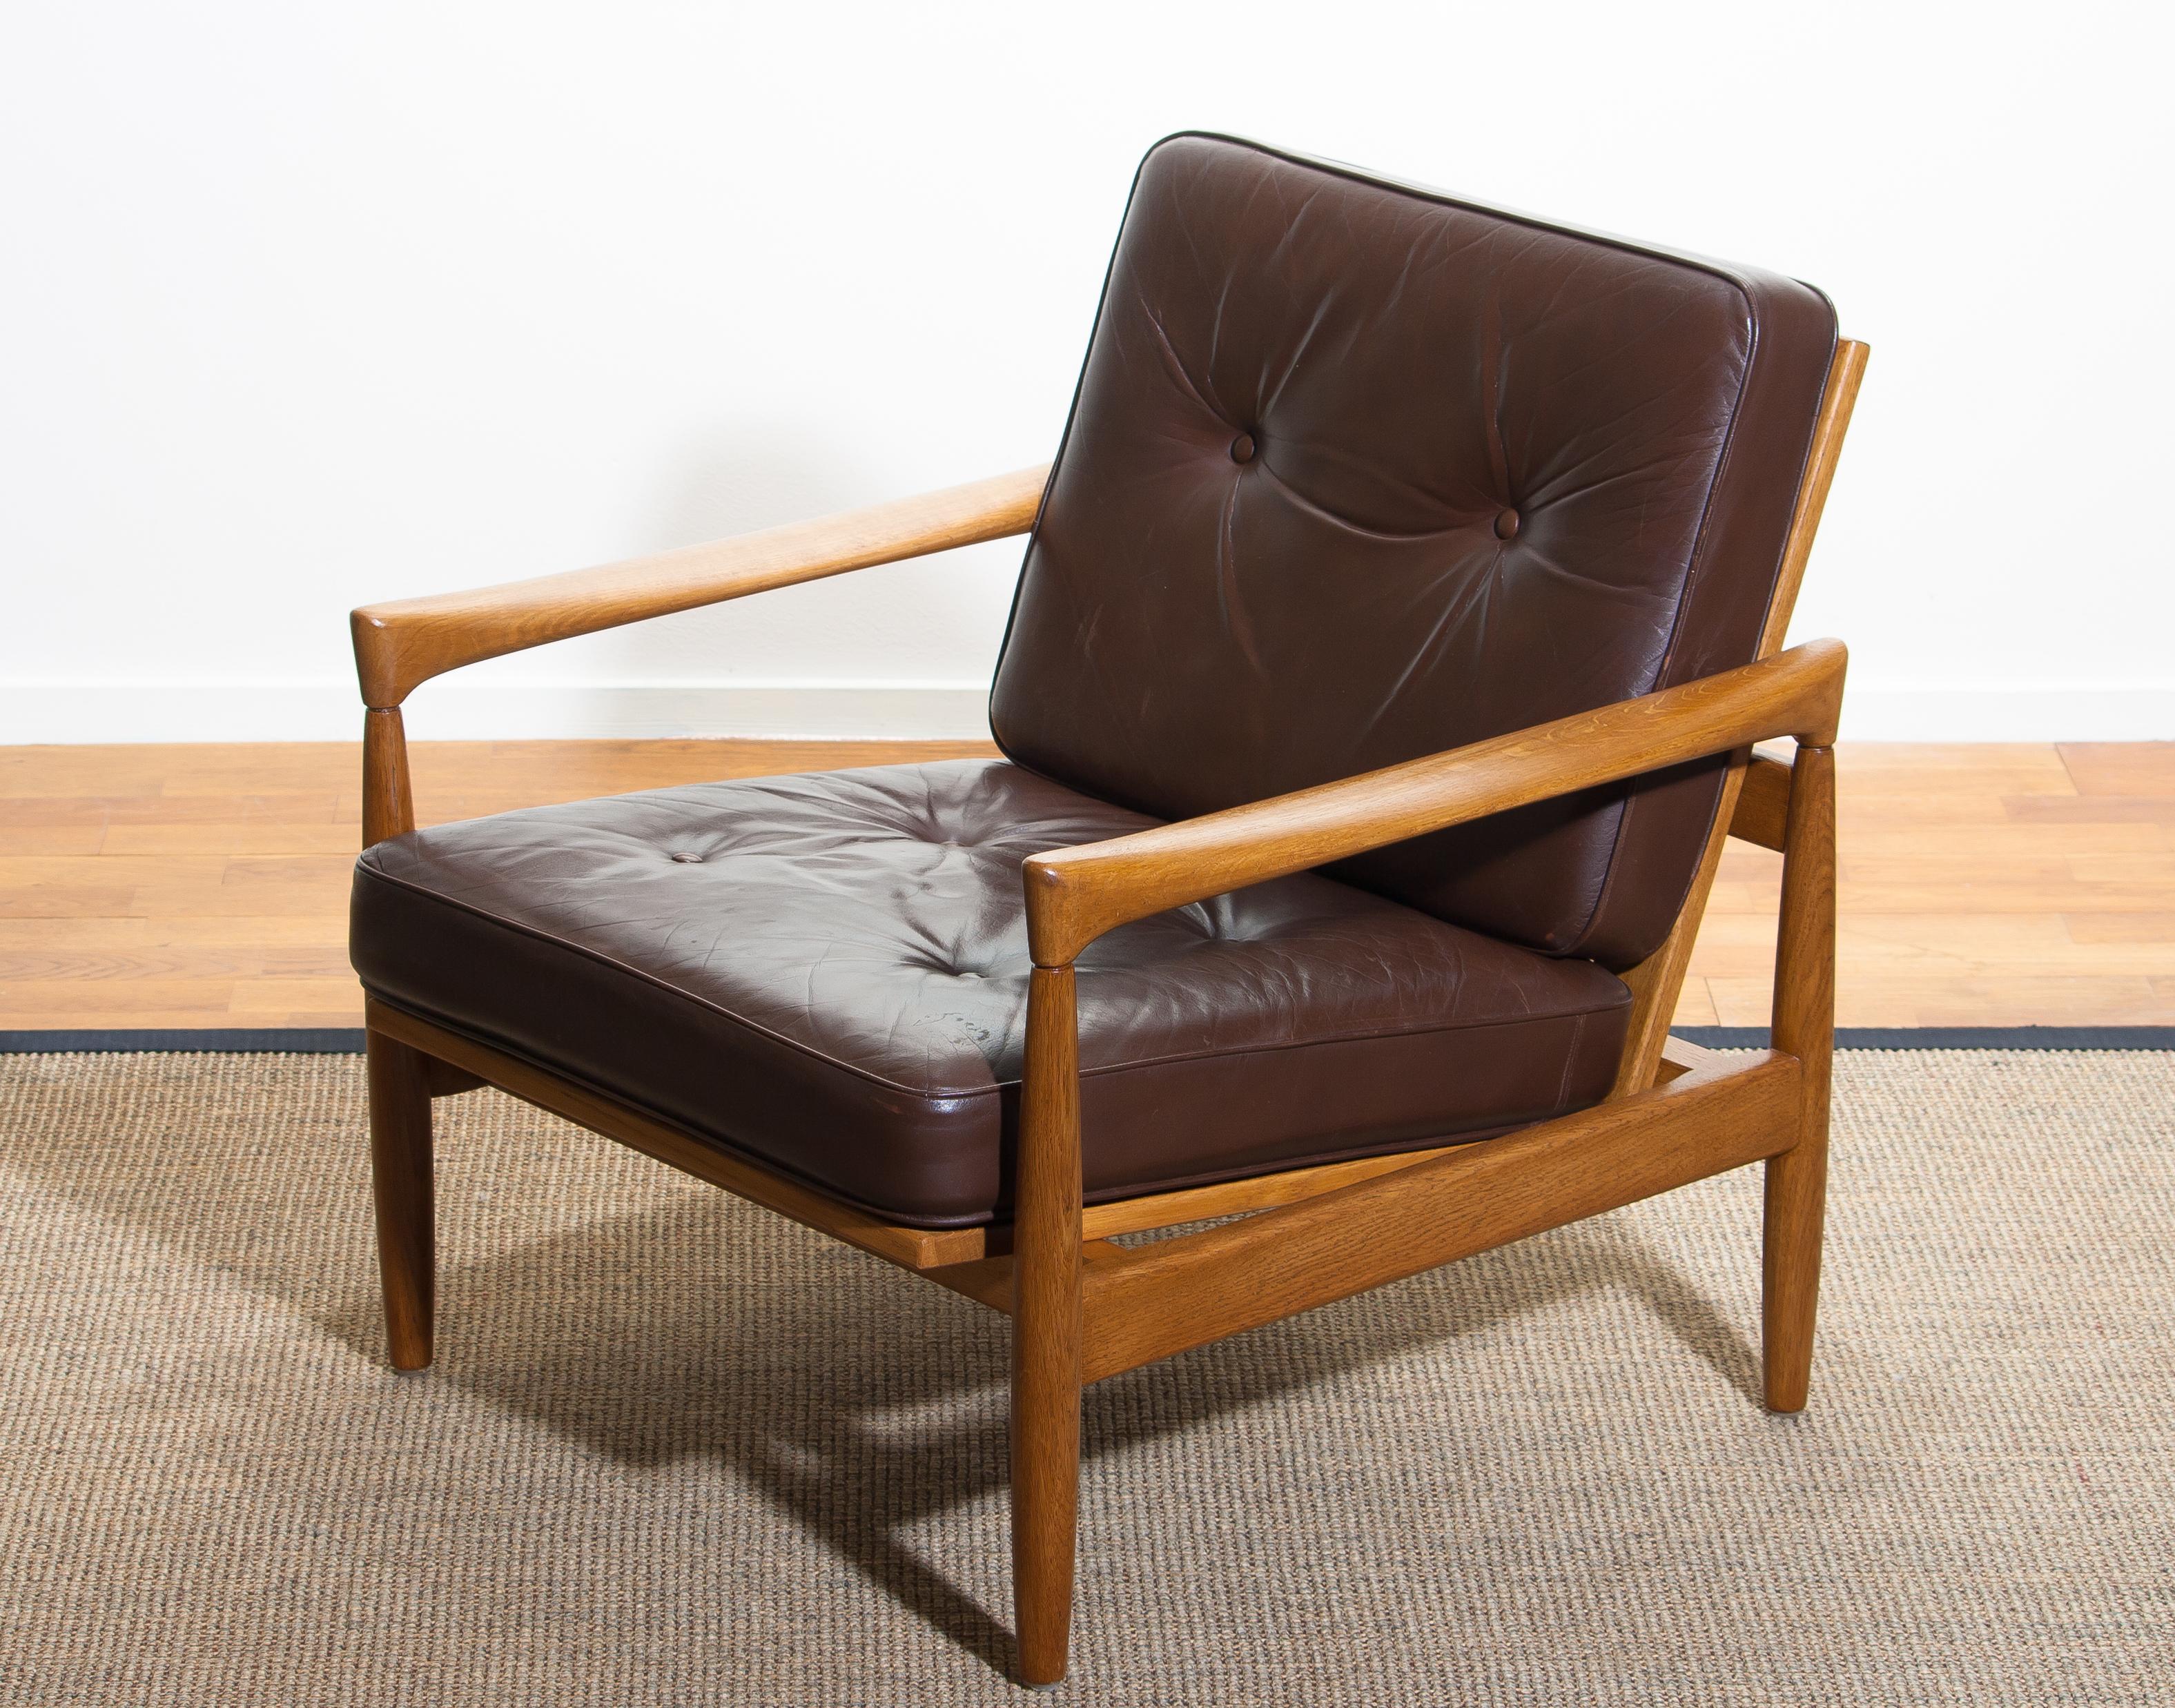 1960s, Oak with Brown Leather Lounge Chair by Erik Wörtz for Bröderna Anderssons 4